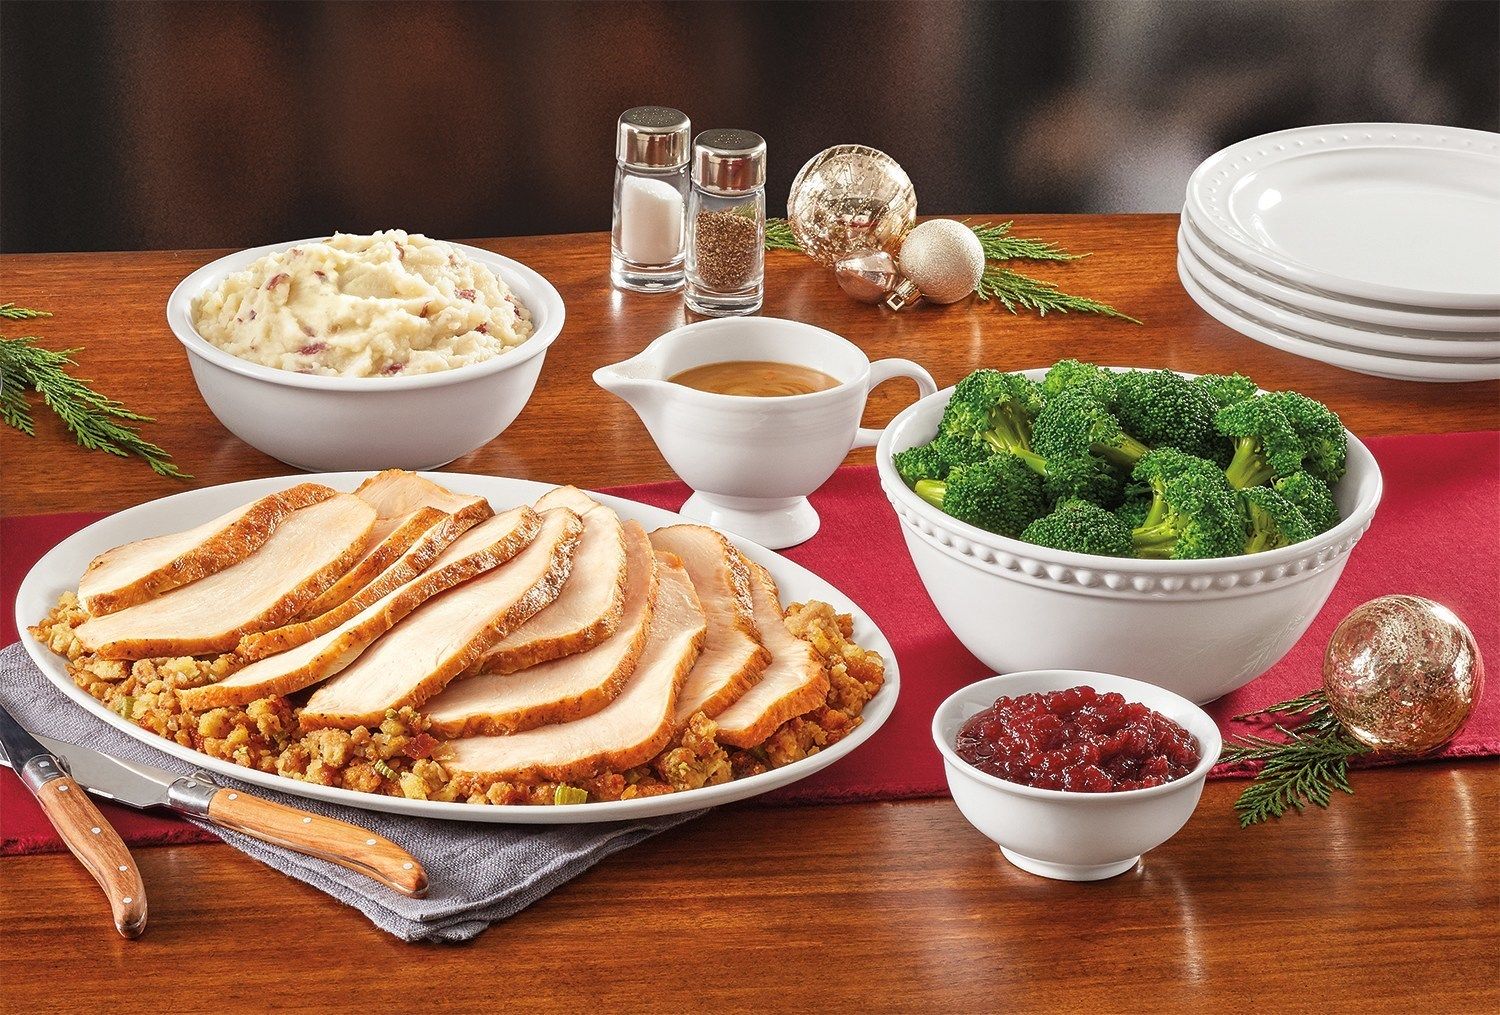 Denny's New Turkey & Dressing Dinner Packs Give Guests A Delicious ...